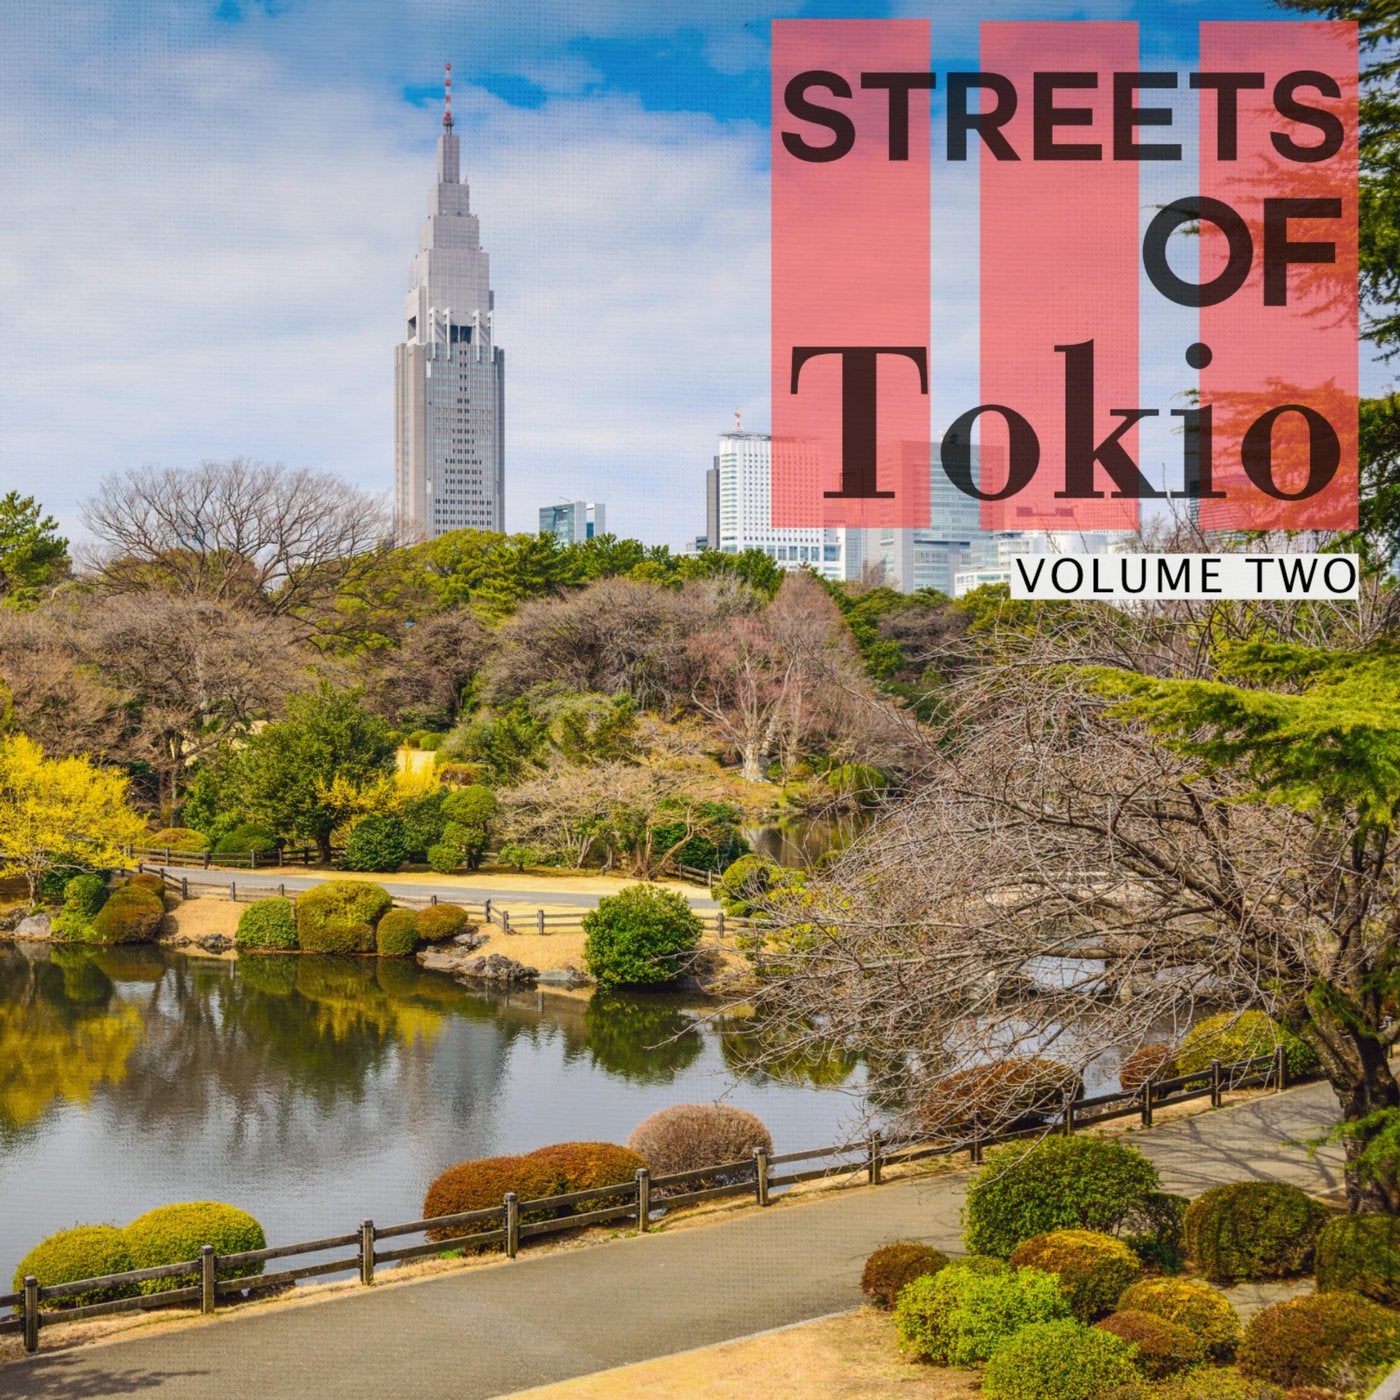 Streets Of - Tokio, Vol. 2 (Okonomiyaki For The Belly, Deep House For The Soul)